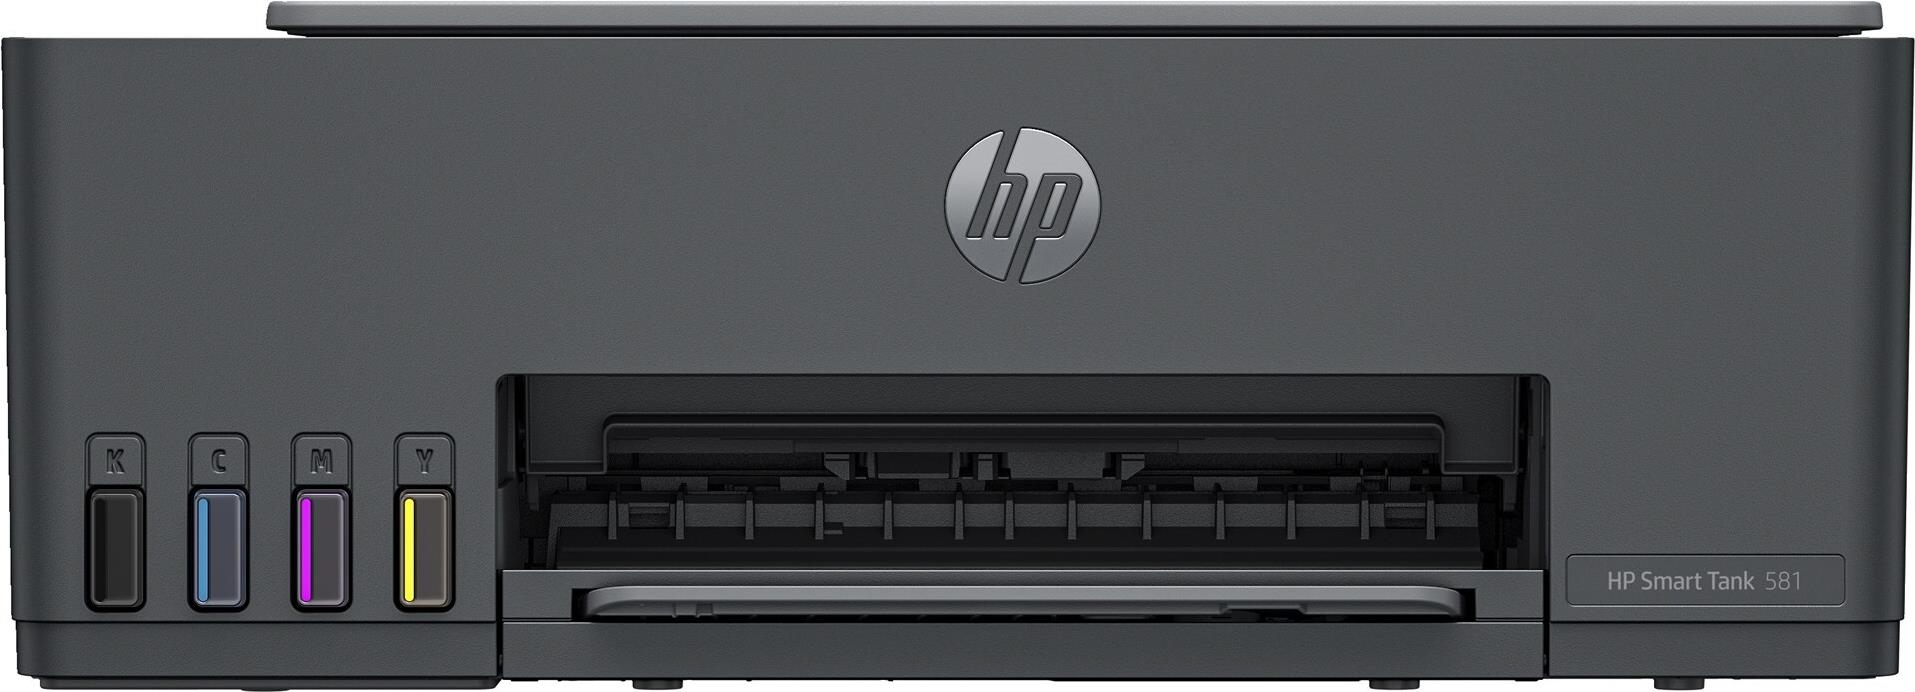 HP Smart Tank 581 All-in-One Printer, Home and home office, Print, copy, scan, Wireless, High-volume printer tank, Print